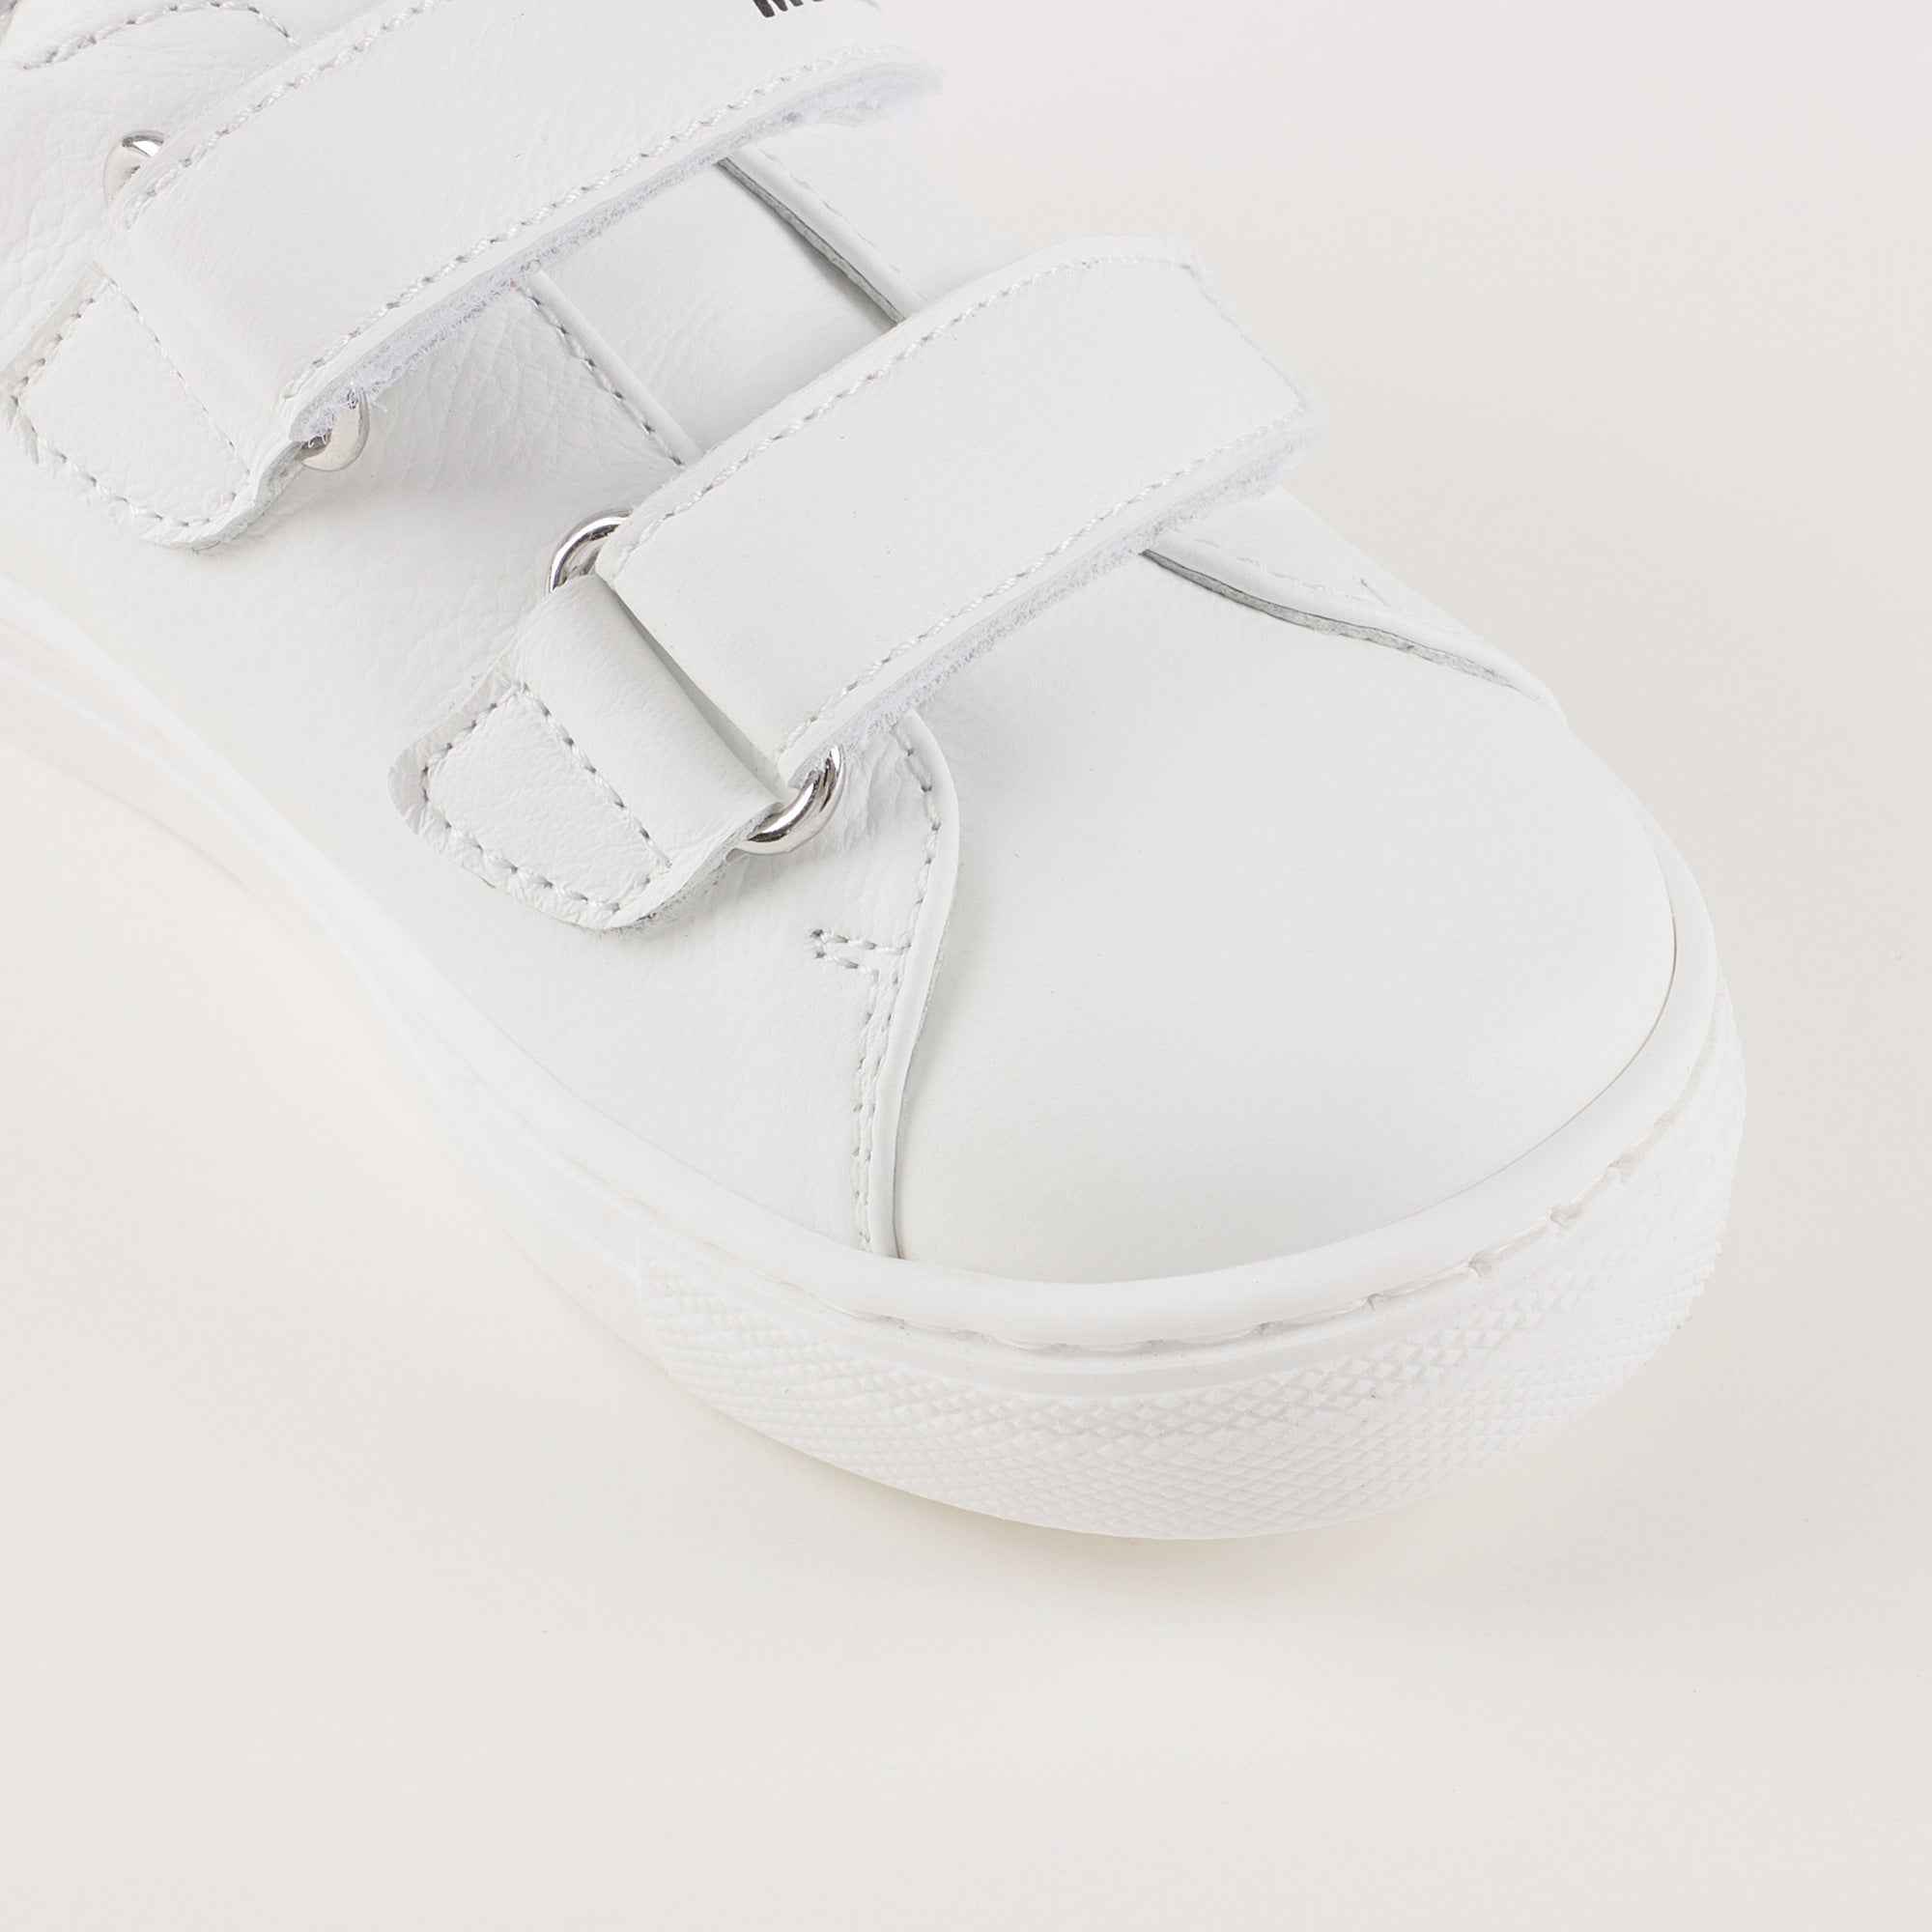 Baby Boys & Girls Silver Shoes